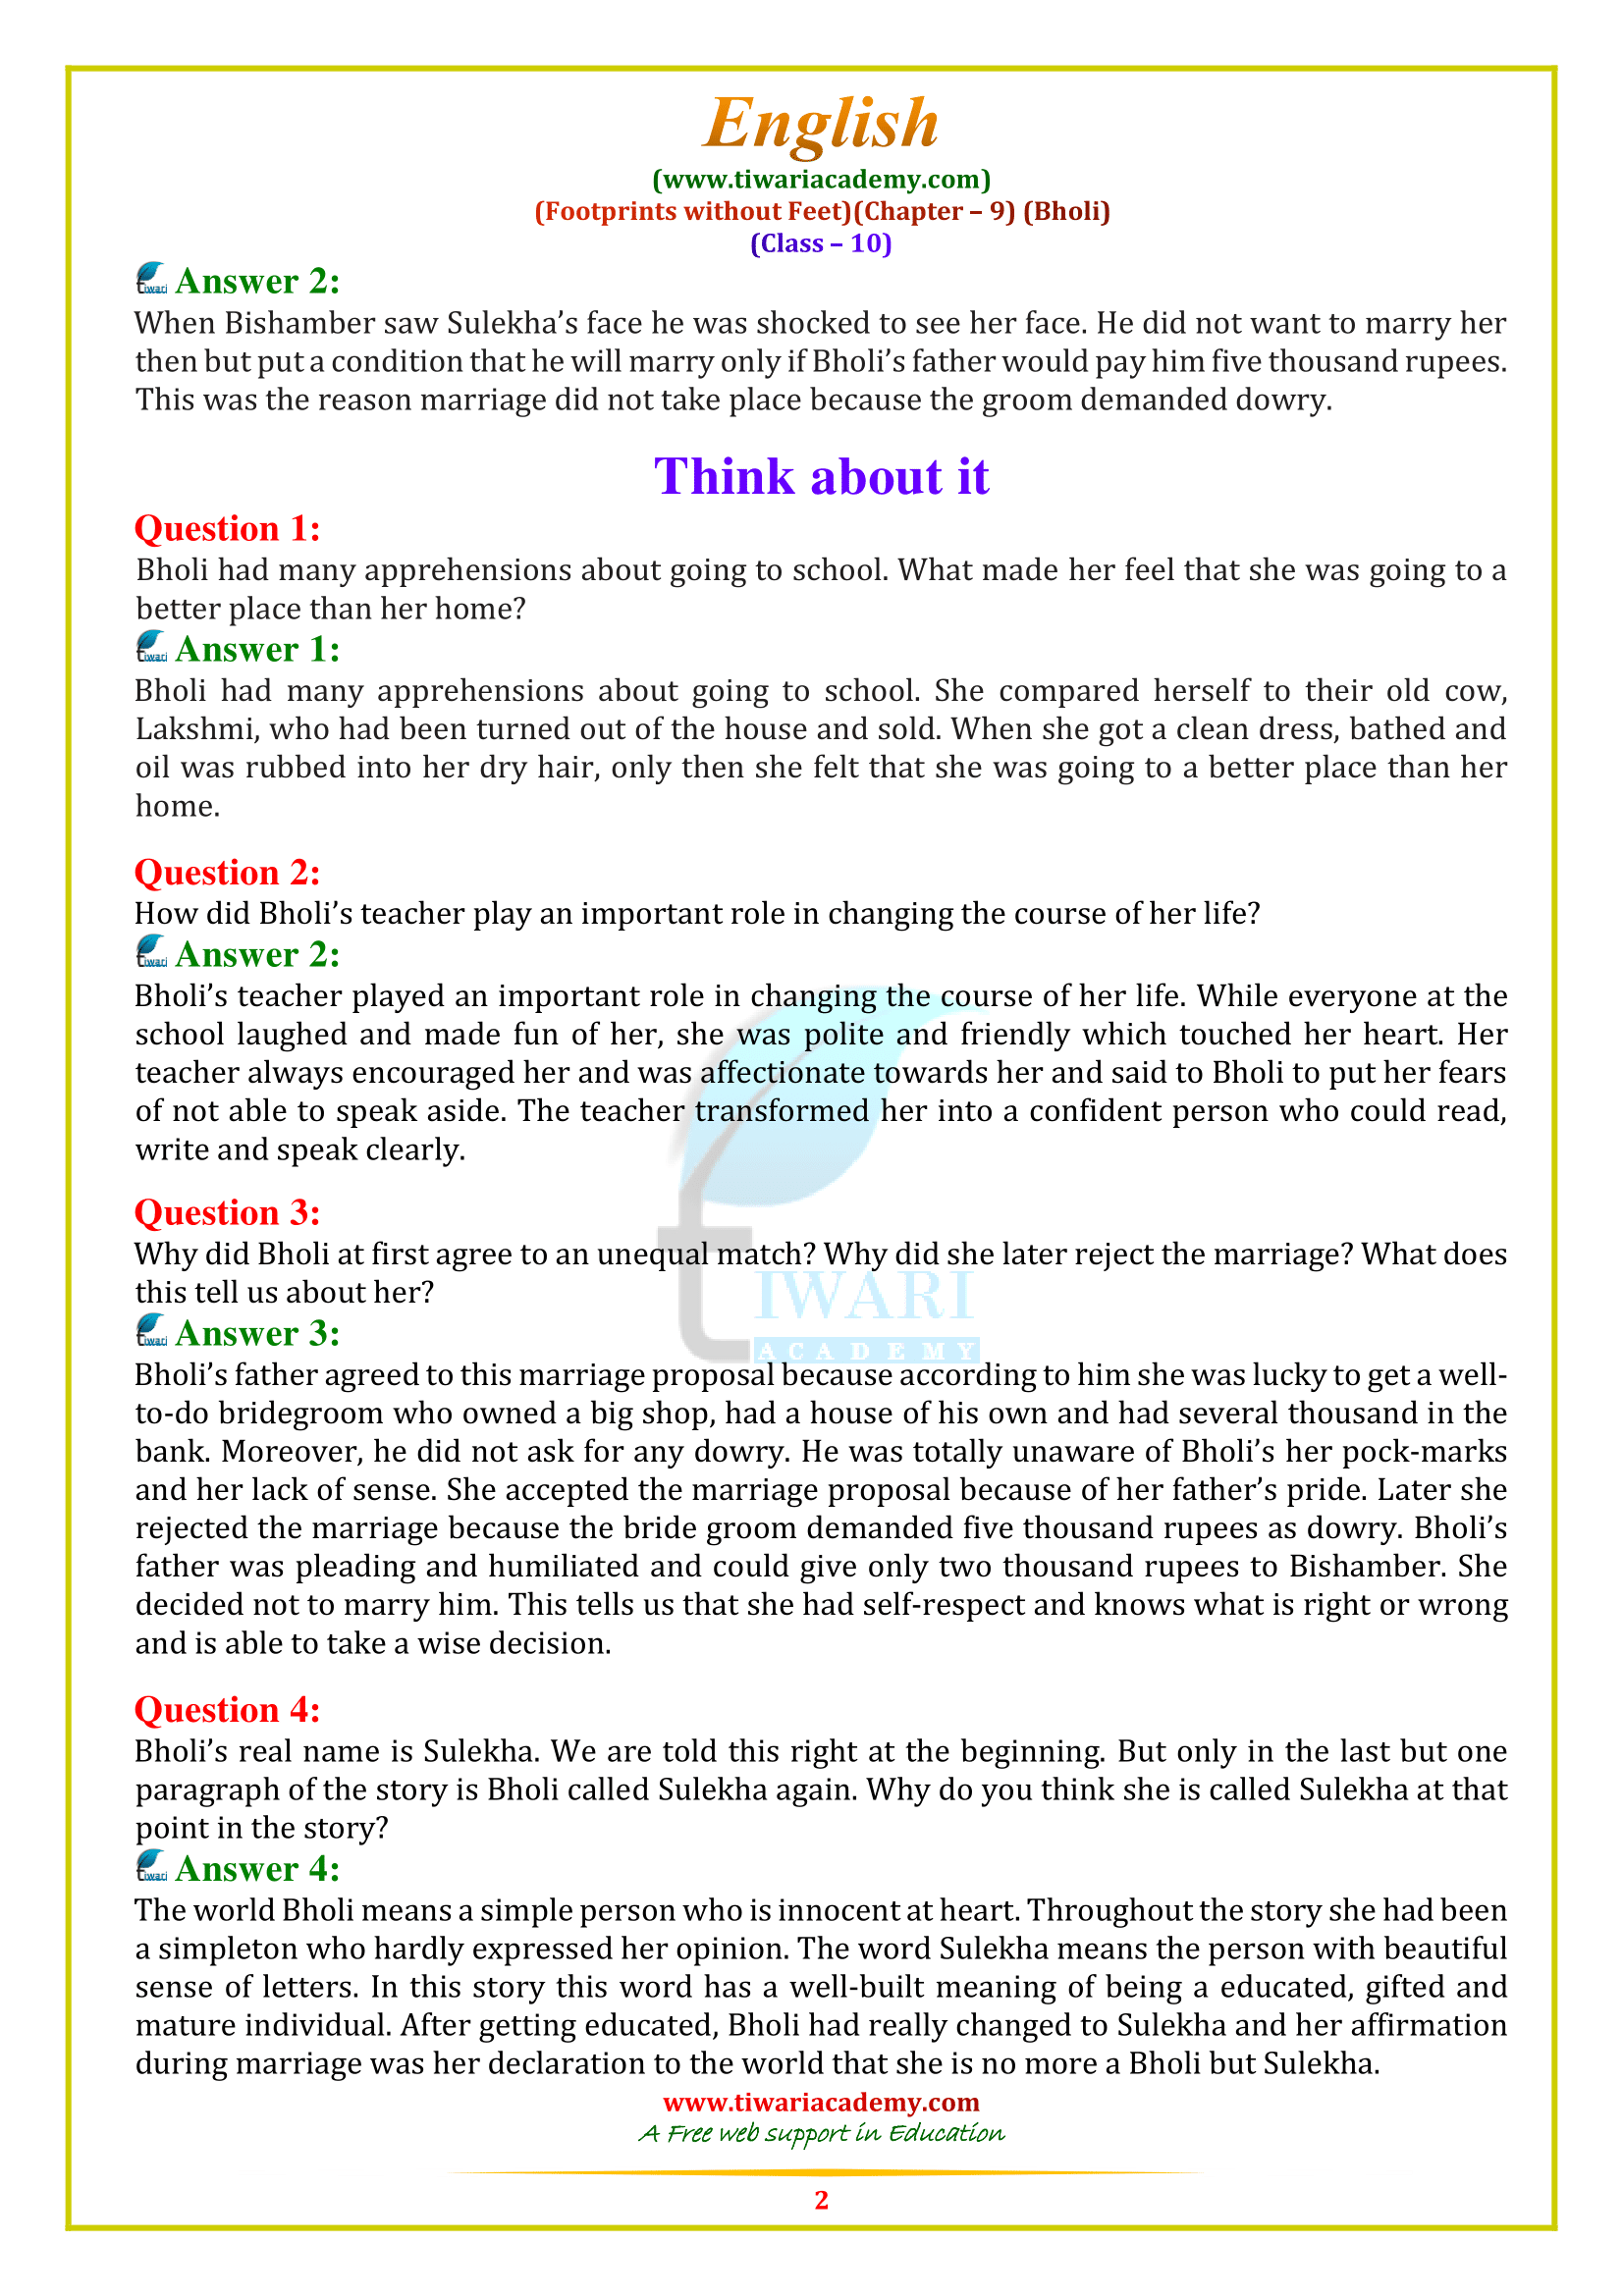 NCERT Solutions for Class 10 English Footprints without feet chapter 9